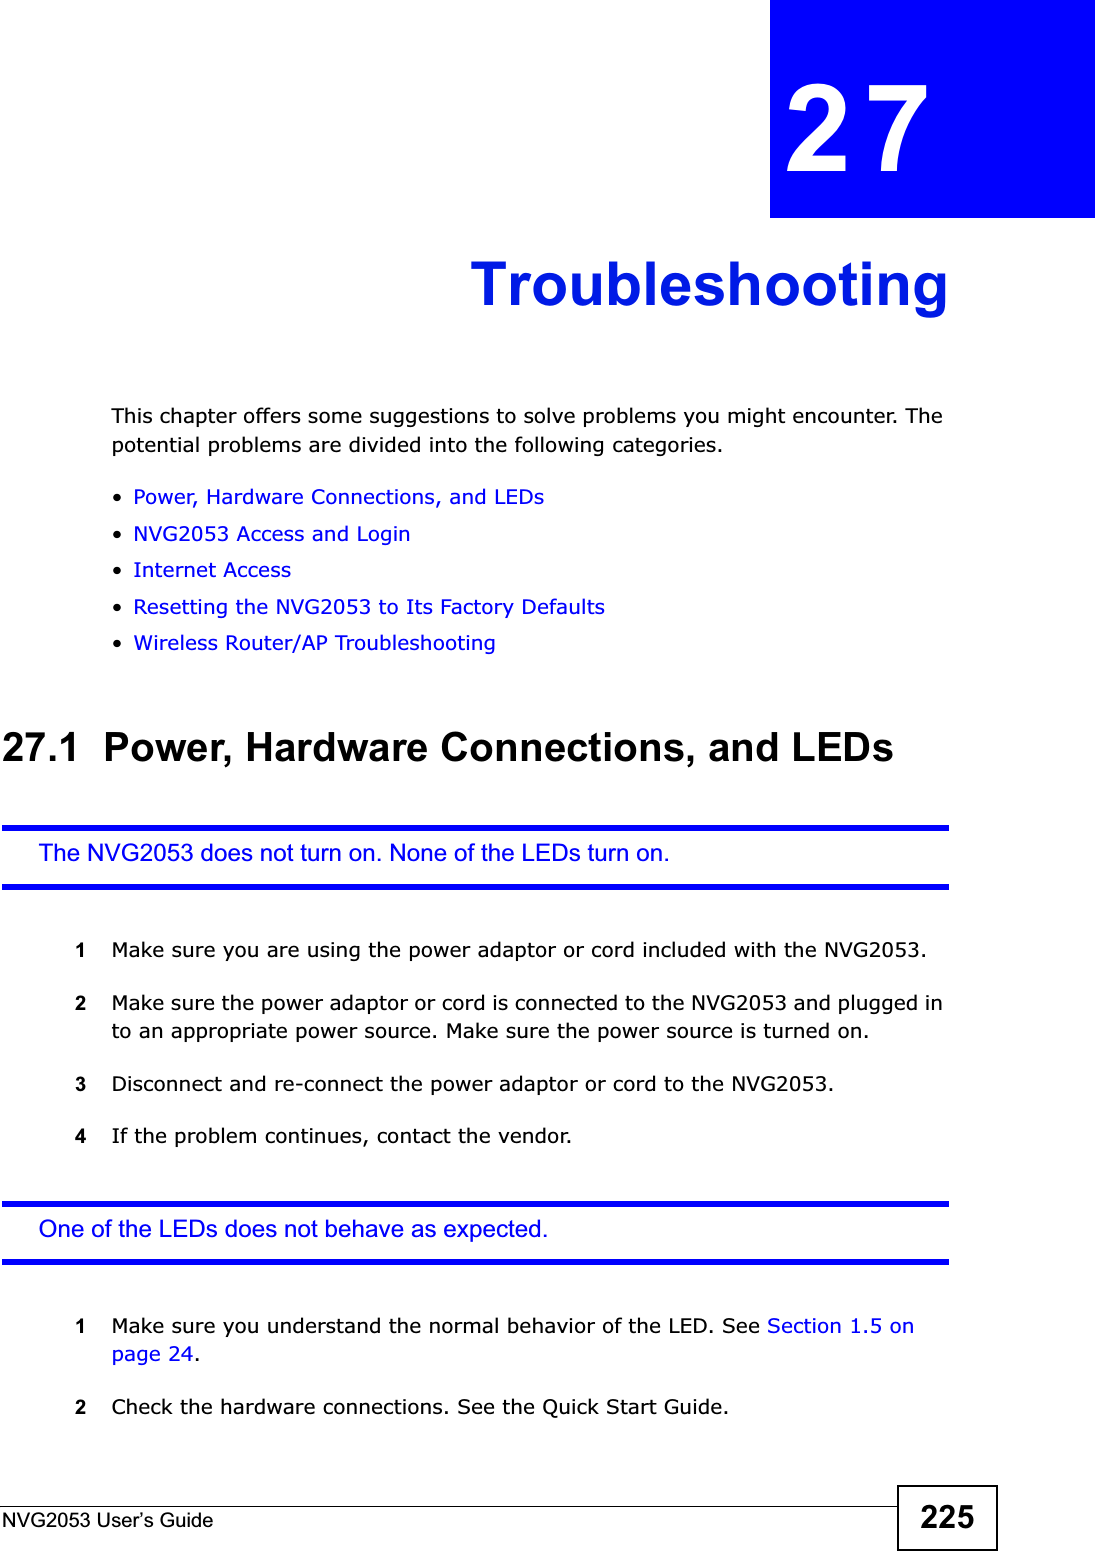 NVG2053 User’s Guide 225CHAPTER 27TroubleshootingThis chapter offers some suggestions to solve problems you might encounter. The potential problems are divided into the following categories. •Power, Hardware Connections, and LEDs•NVG2053 Access and Login•Internet Access•Resetting the NVG2053 to Its Factory Defaults•Wireless Router/AP Troubleshooting27.1  Power, Hardware Connections, and LEDsThe NVG2053 does not turn on. None of the LEDs turn on.1Make sure you are using the power adaptor or cord included with the NVG2053.2Make sure the power adaptor or cord is connected to the NVG2053 and plugged in to an appropriate power source. Make sure the power source is turned on.3Disconnect and re-connect the power adaptor or cord to the NVG2053.4If the problem continues, contact the vendor.One of the LEDs does not behave as expected.1Make sure you understand the normal behavior of the LED. See Section 1.5 on page 24.2Check the hardware connections. See the Quick Start Guide. 